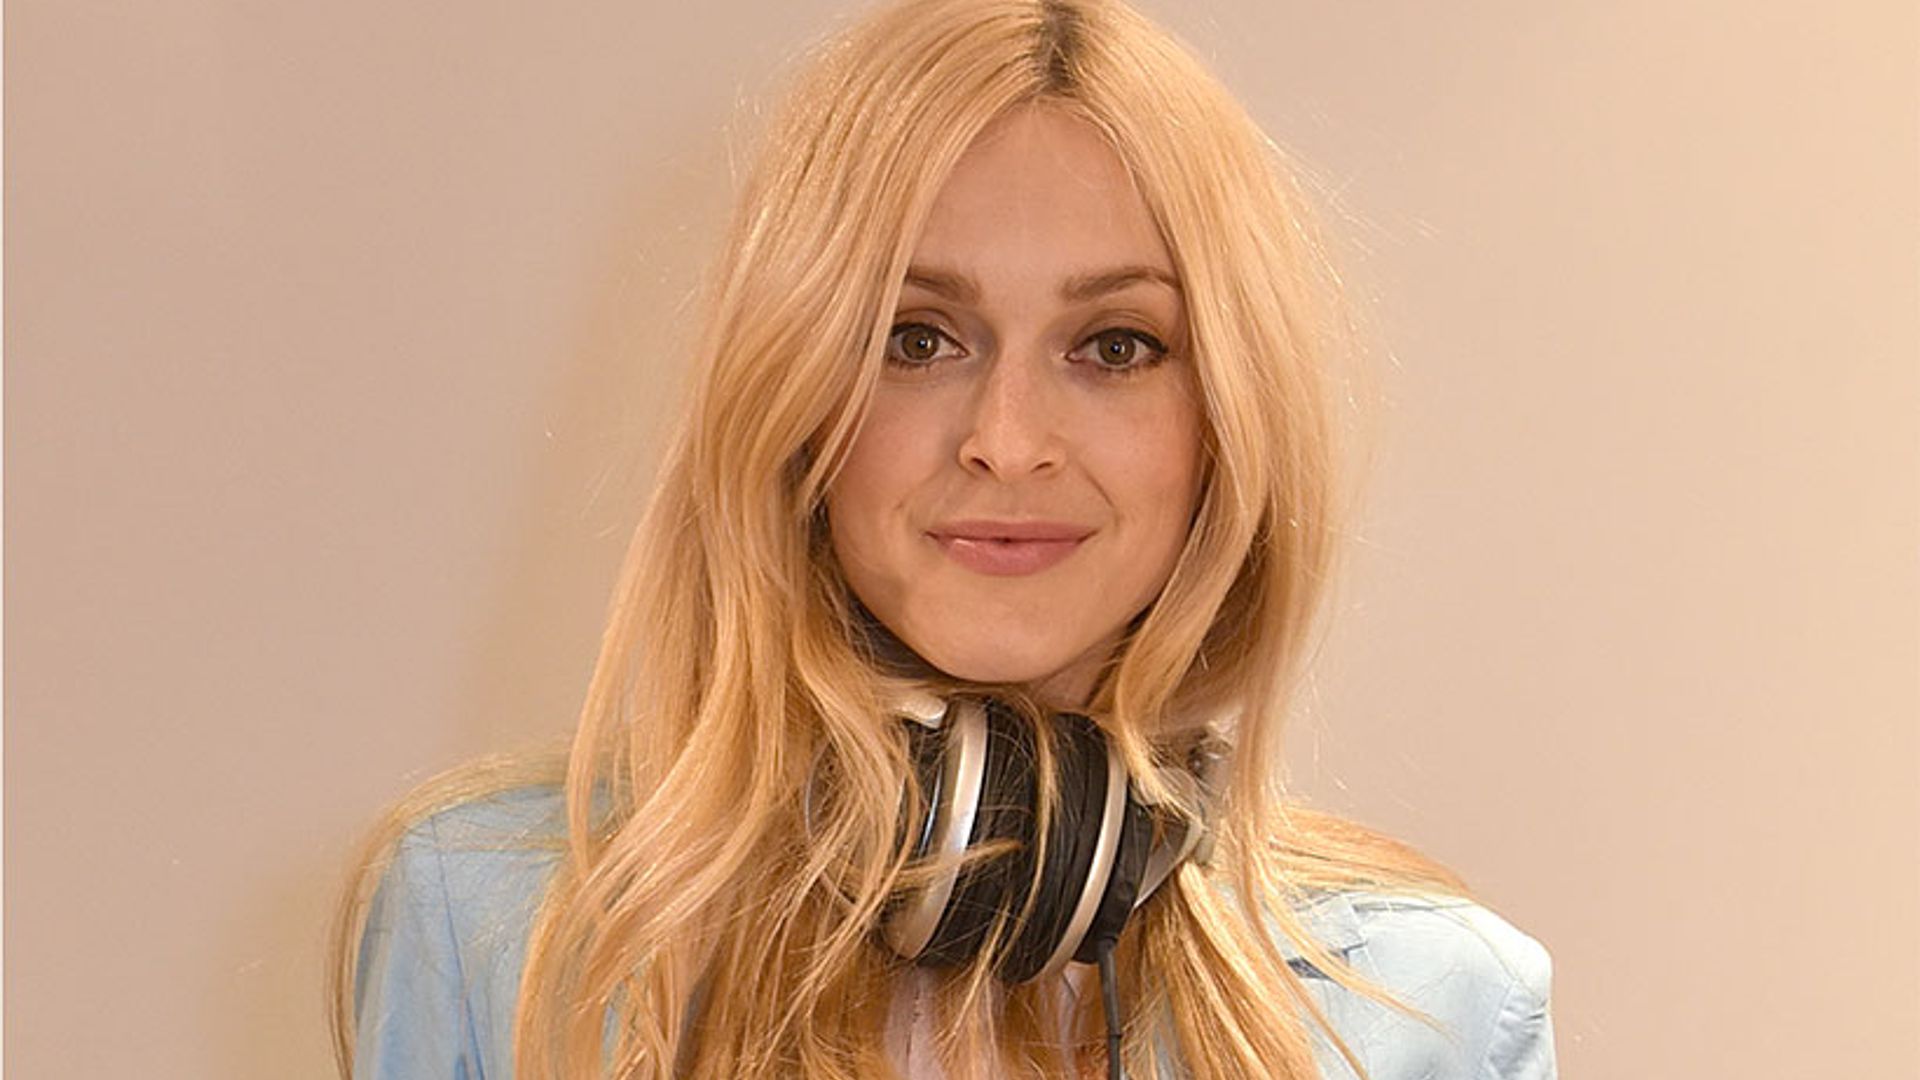 Fearne Cotton's red power suit will make your jaw drop - and it's from Zara